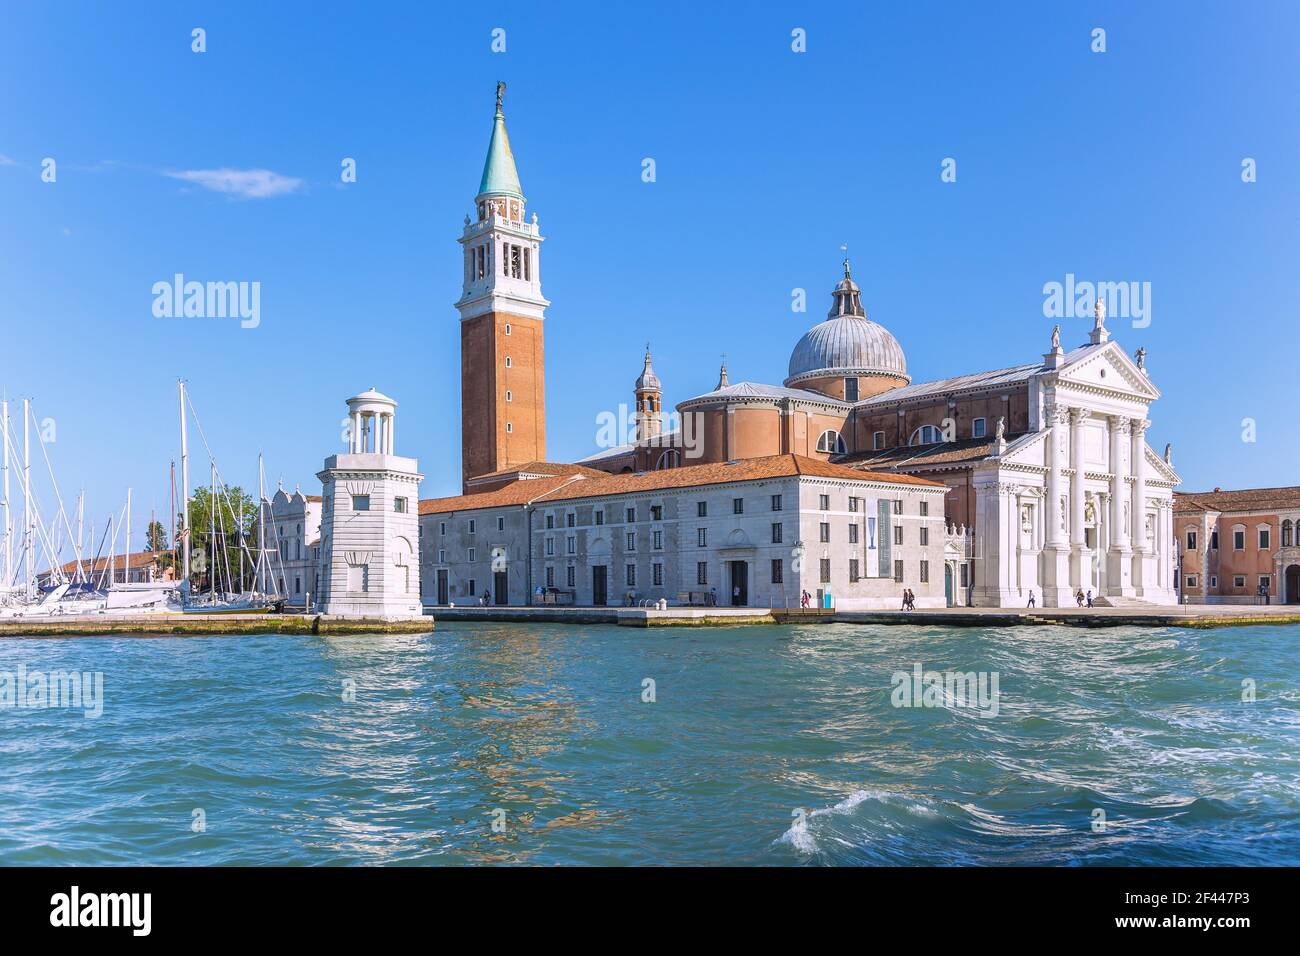 Geographie / Reisen, Italien, Venetien, Venedig, Basilika San Giorgio Maggiore, Additional-Rights-Clearance-Info-not-available Stockfoto